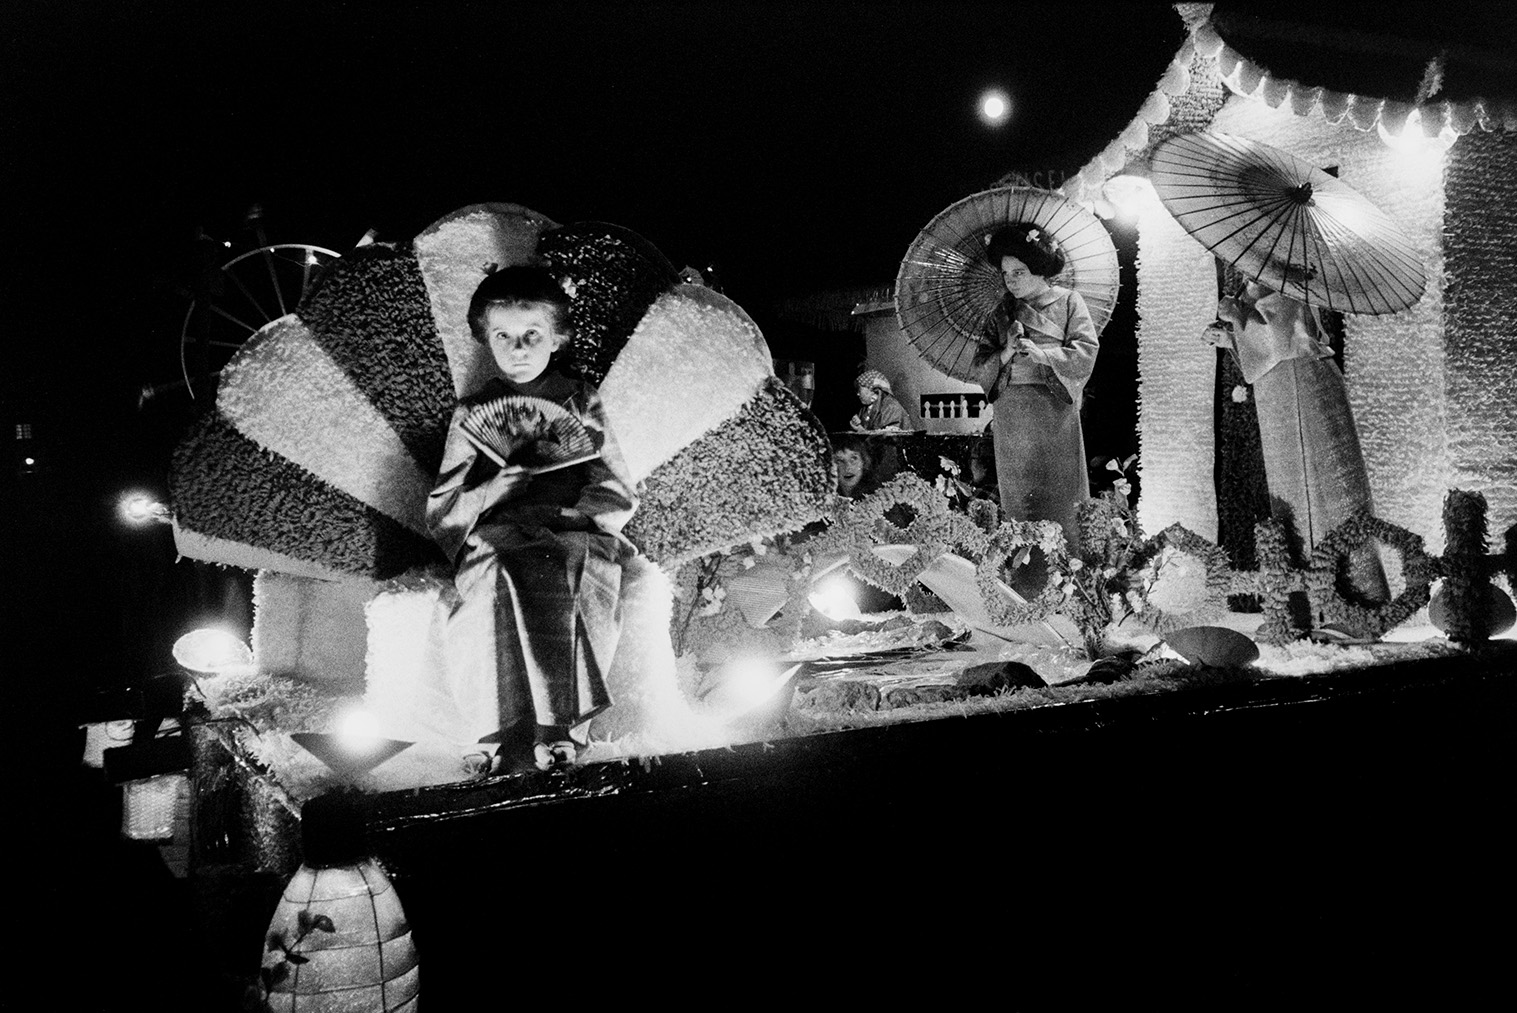 Women and a child on a Japanese themed carnival float at Hatherleigh Carnival, at night.